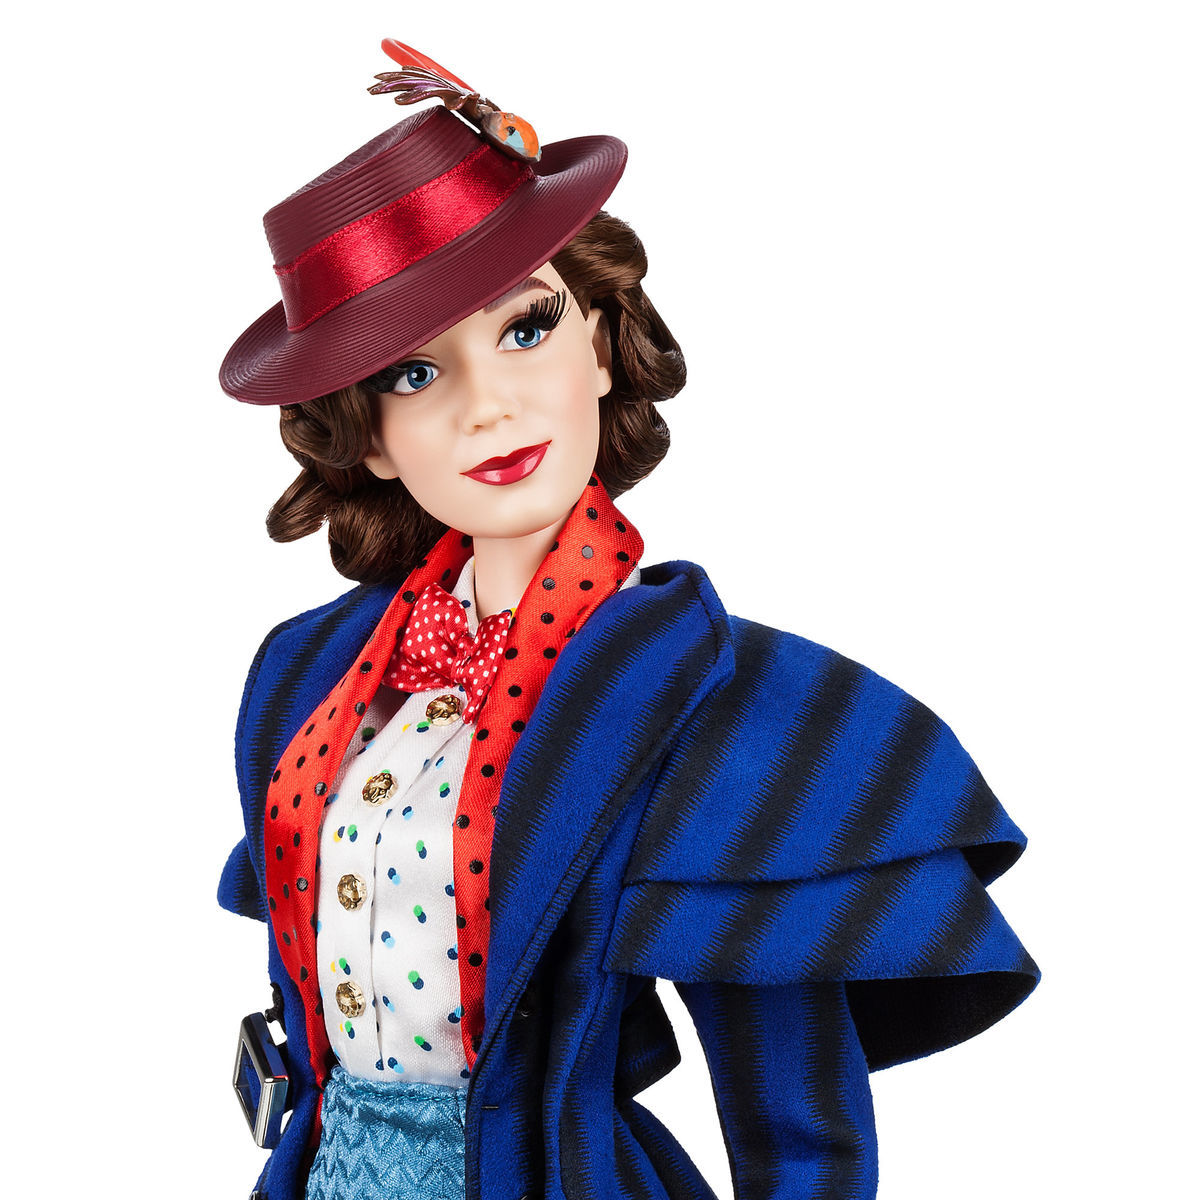 mary poppins returns doll limited edition